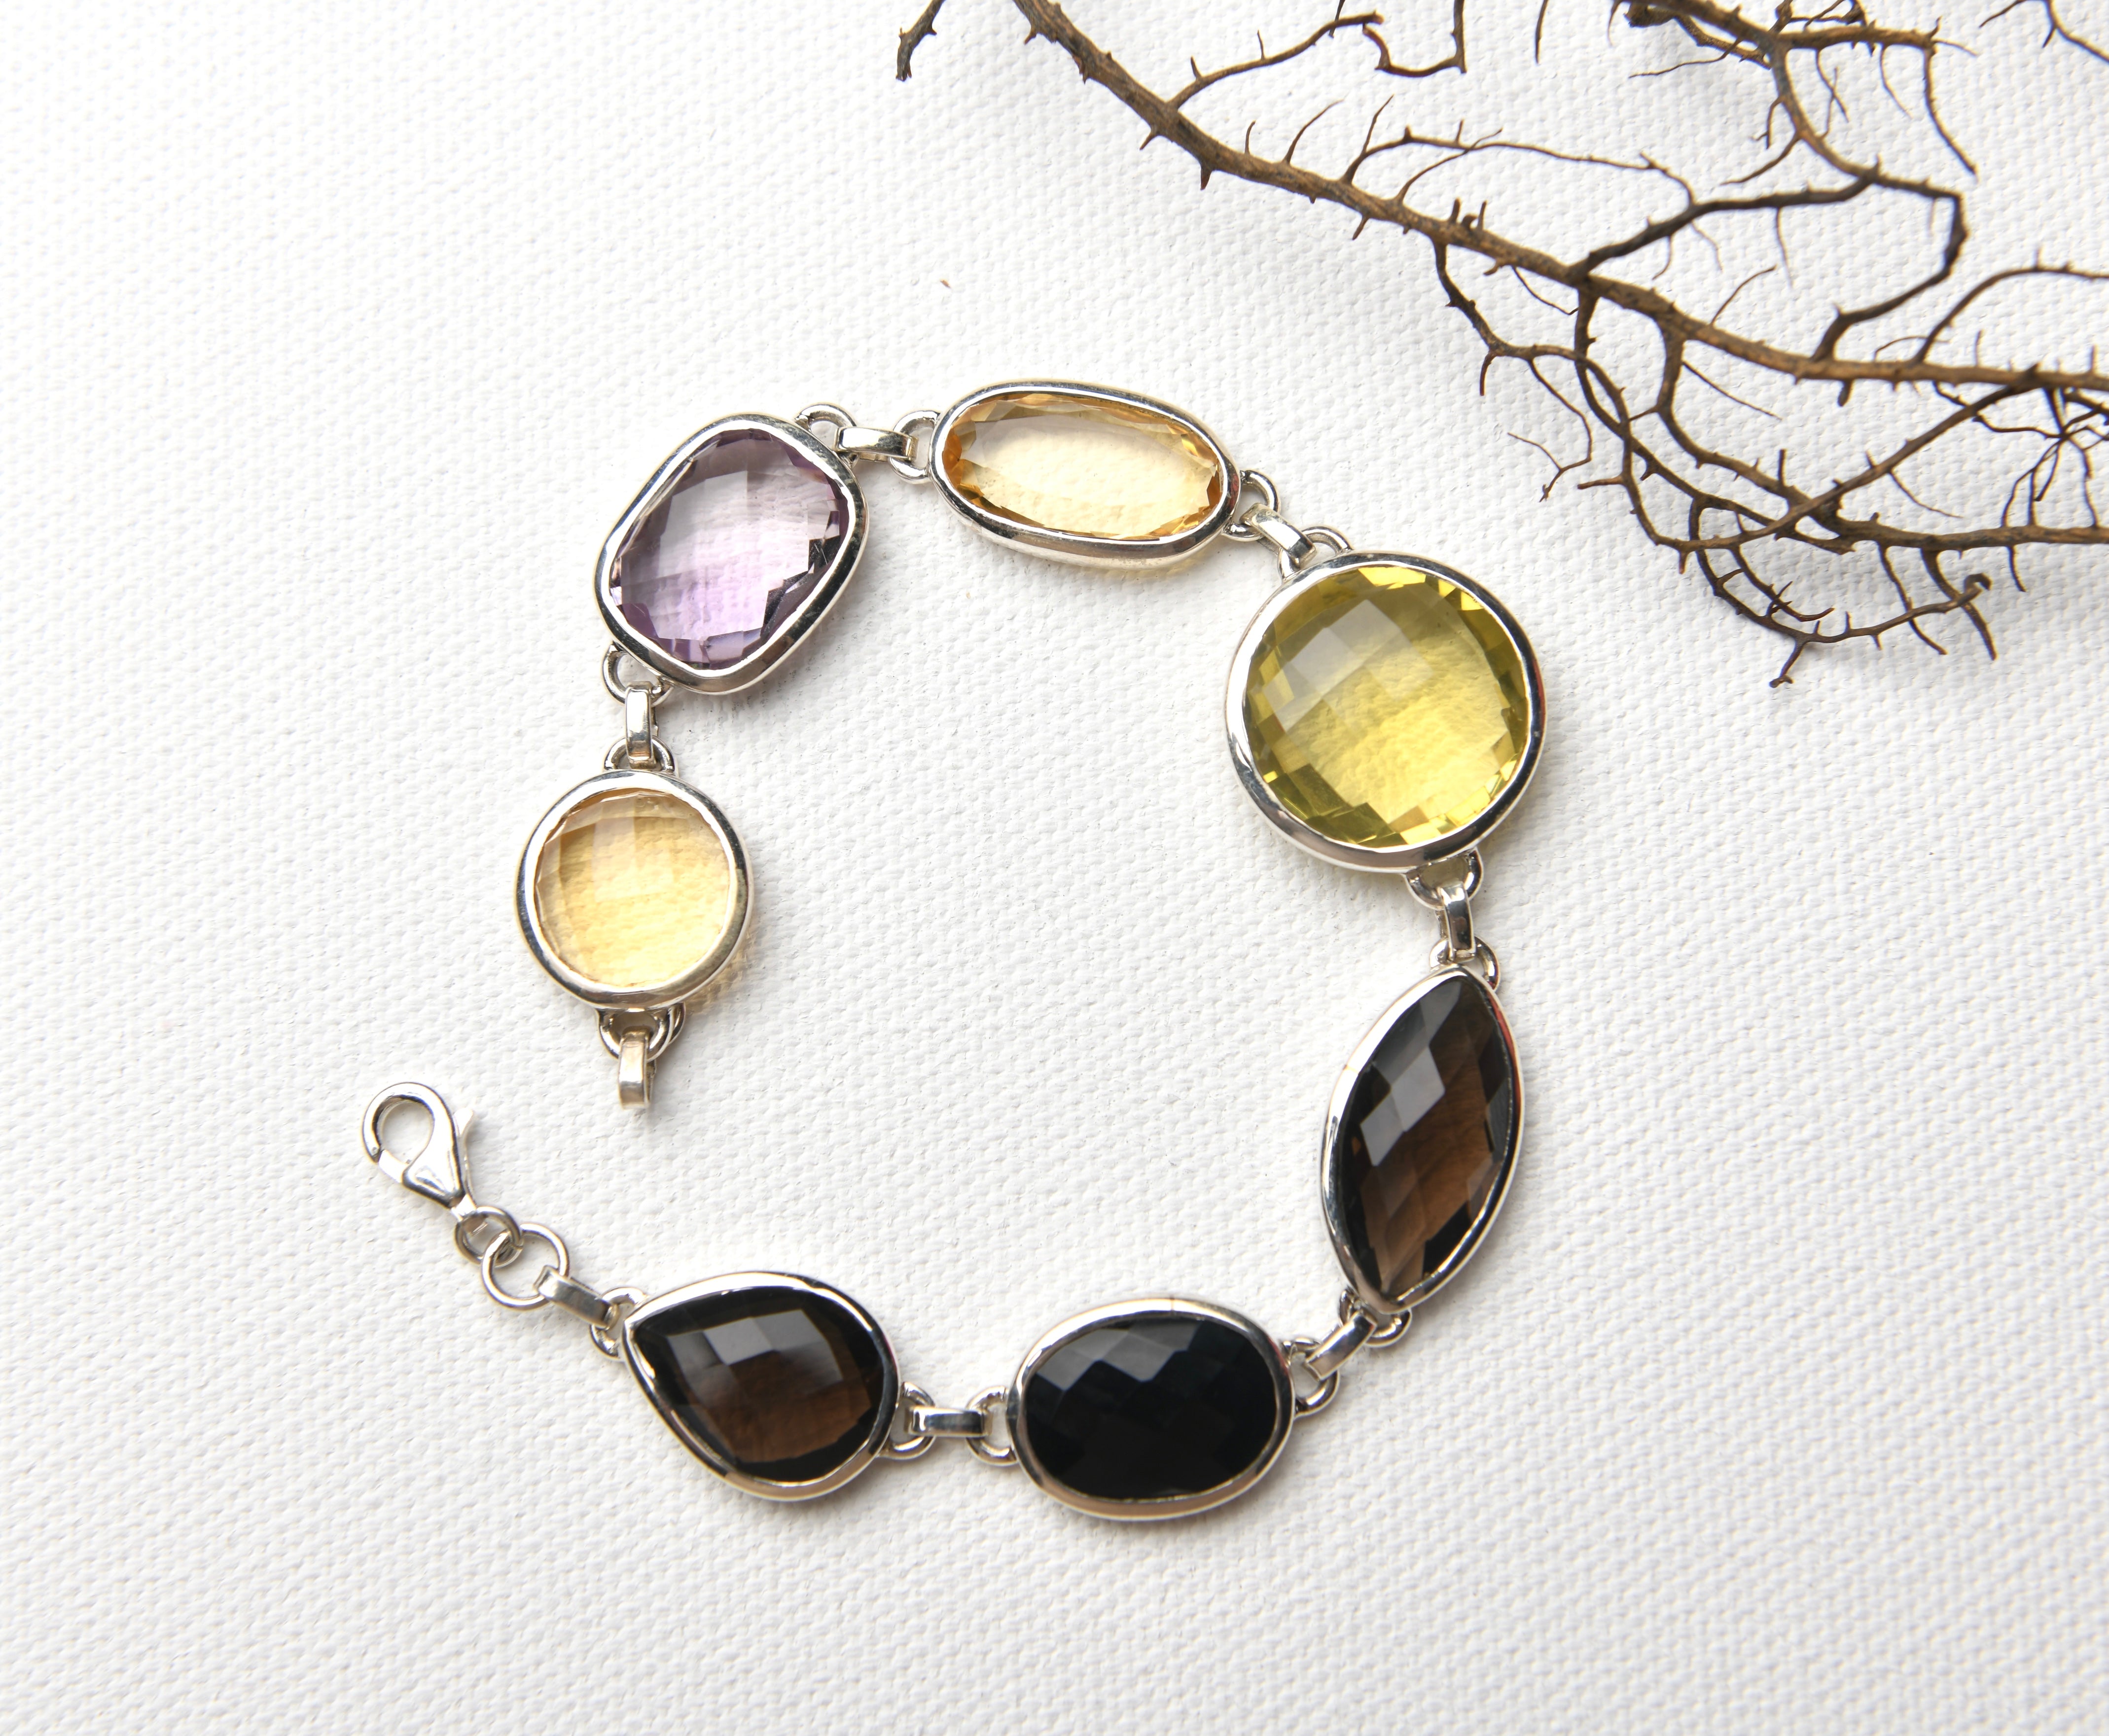 Buy Syan 925 Sterling Silver Natural Multi Color Stone Bracelet at Amazon.in